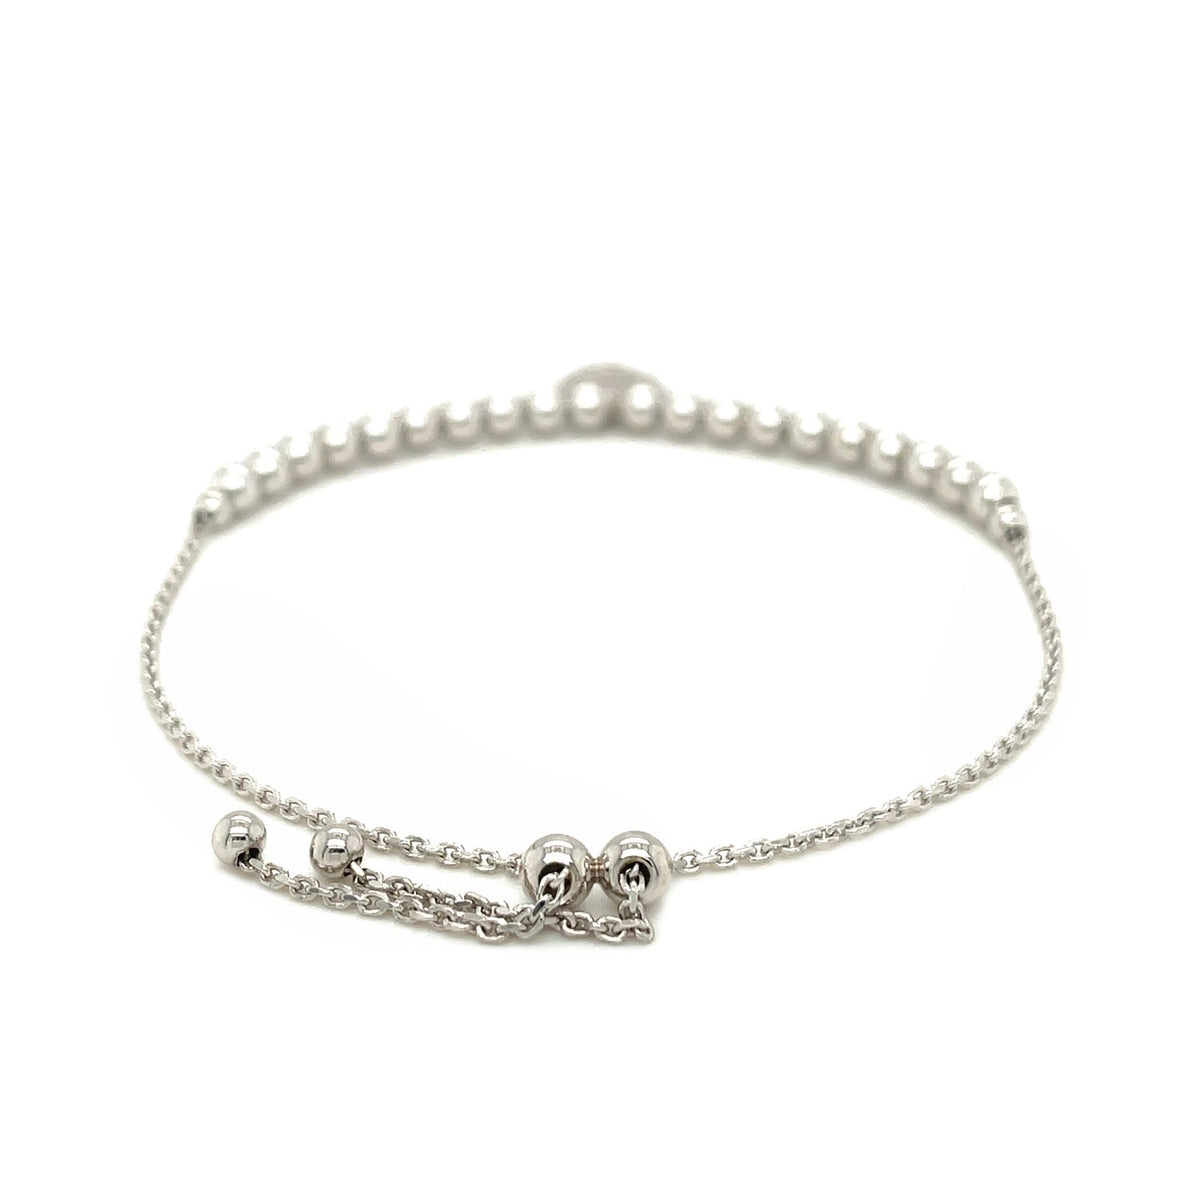 Adjustable Bead Bracelet with Round Charm - Sterling Silver